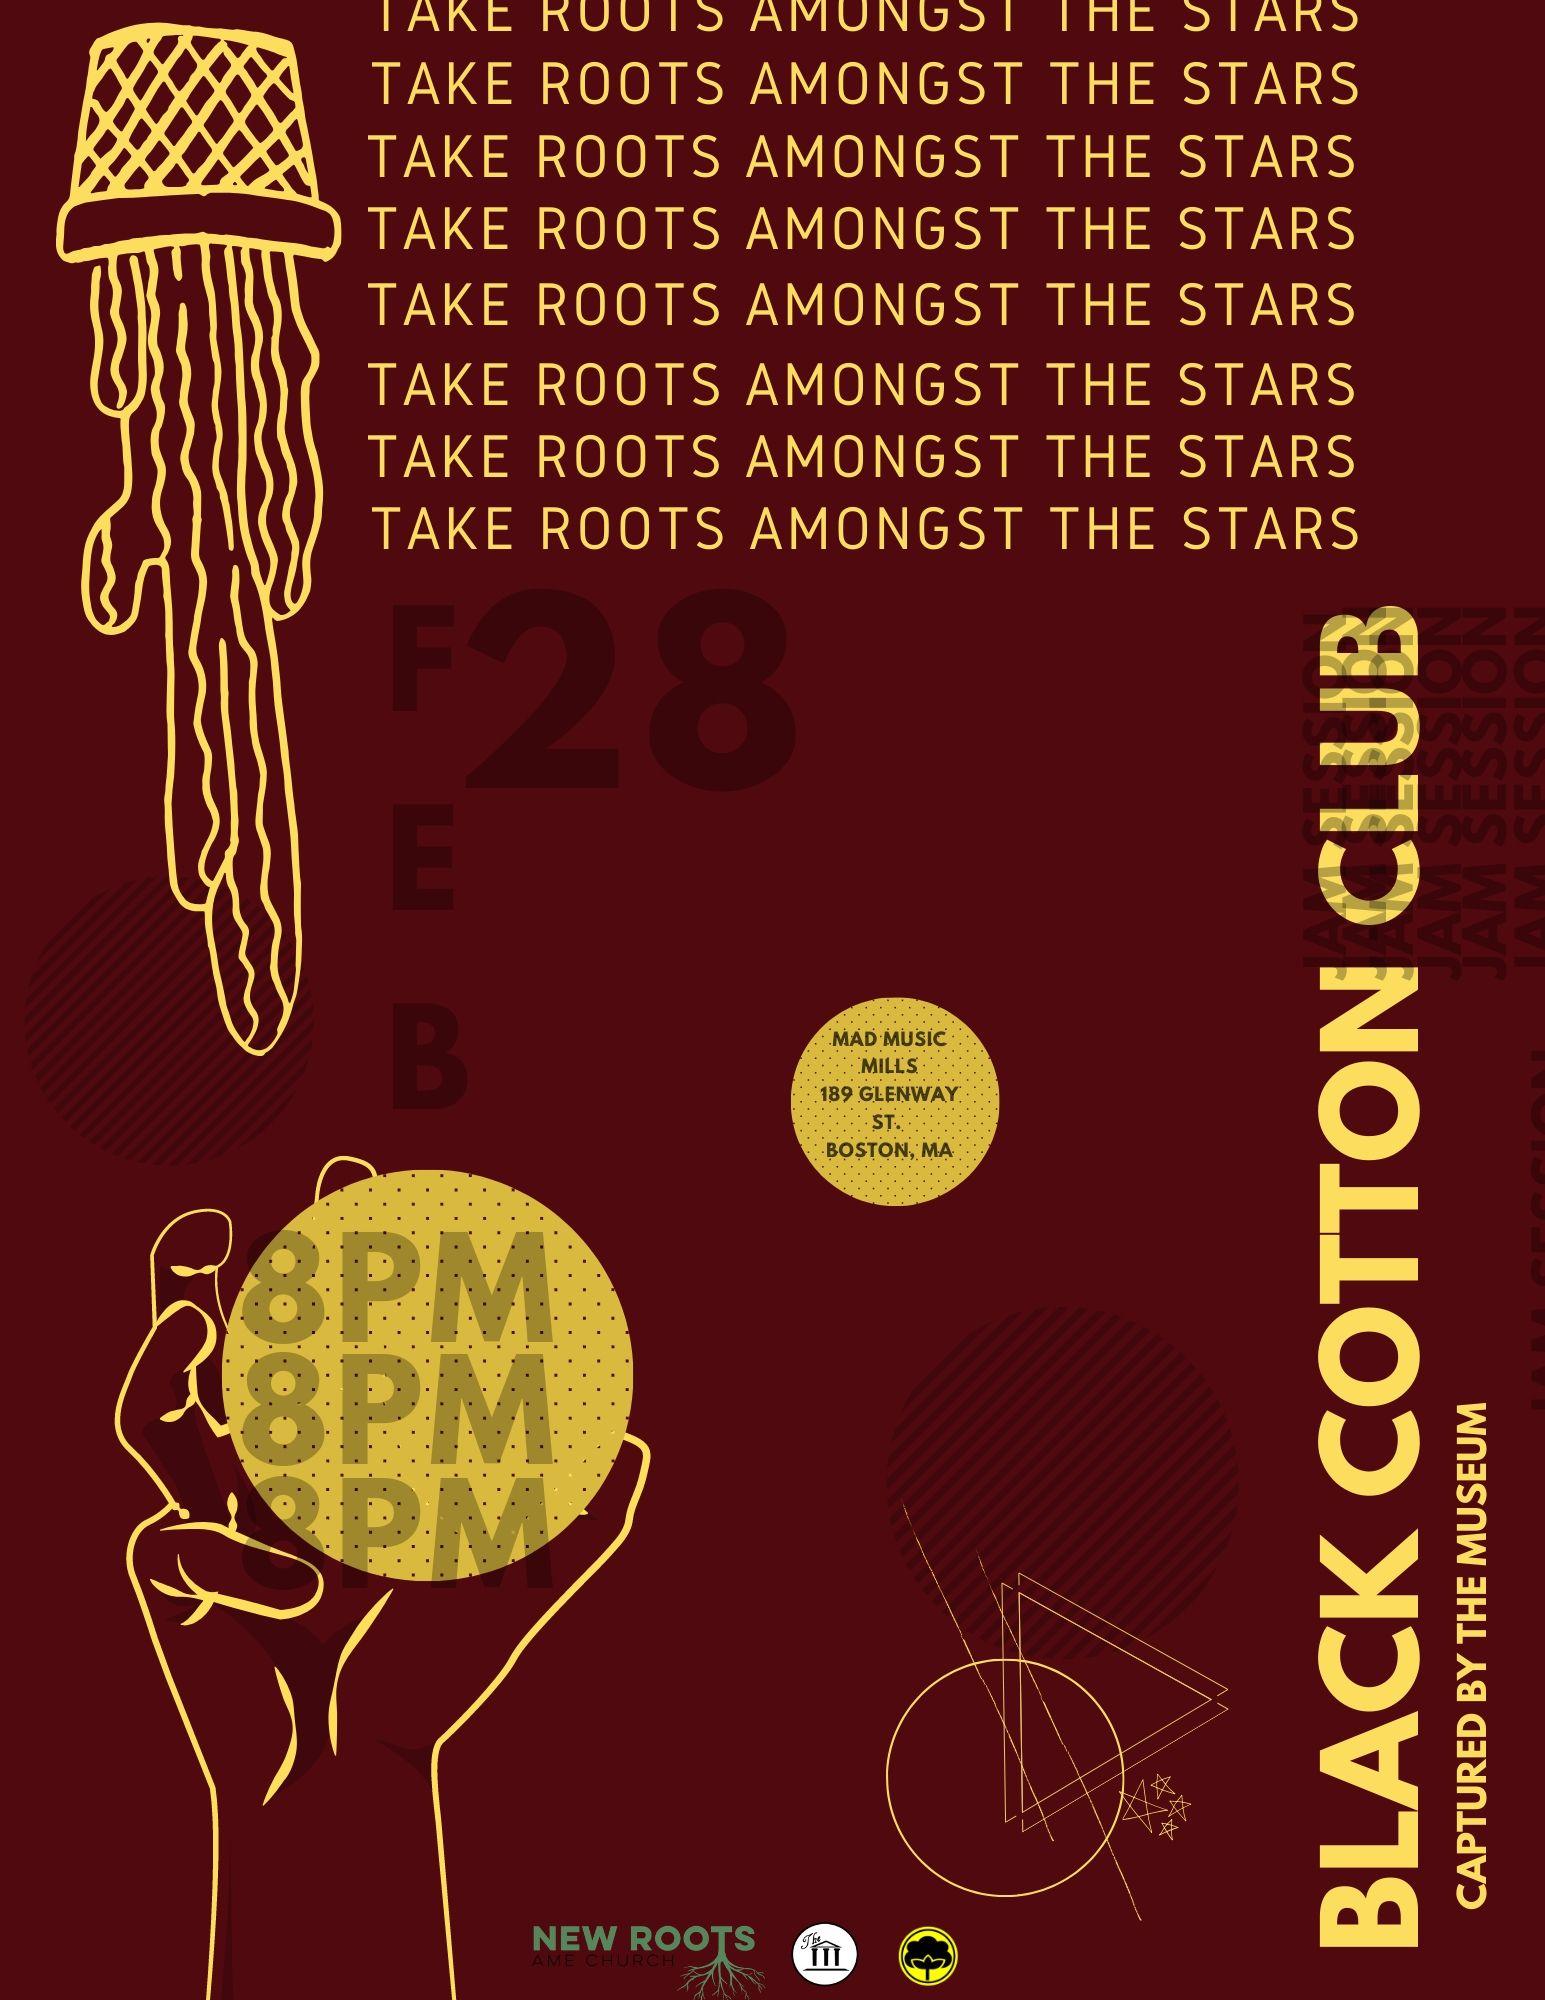 Black Cotton Club Jam Session- Take Root Amongst The Stars: An Interlude